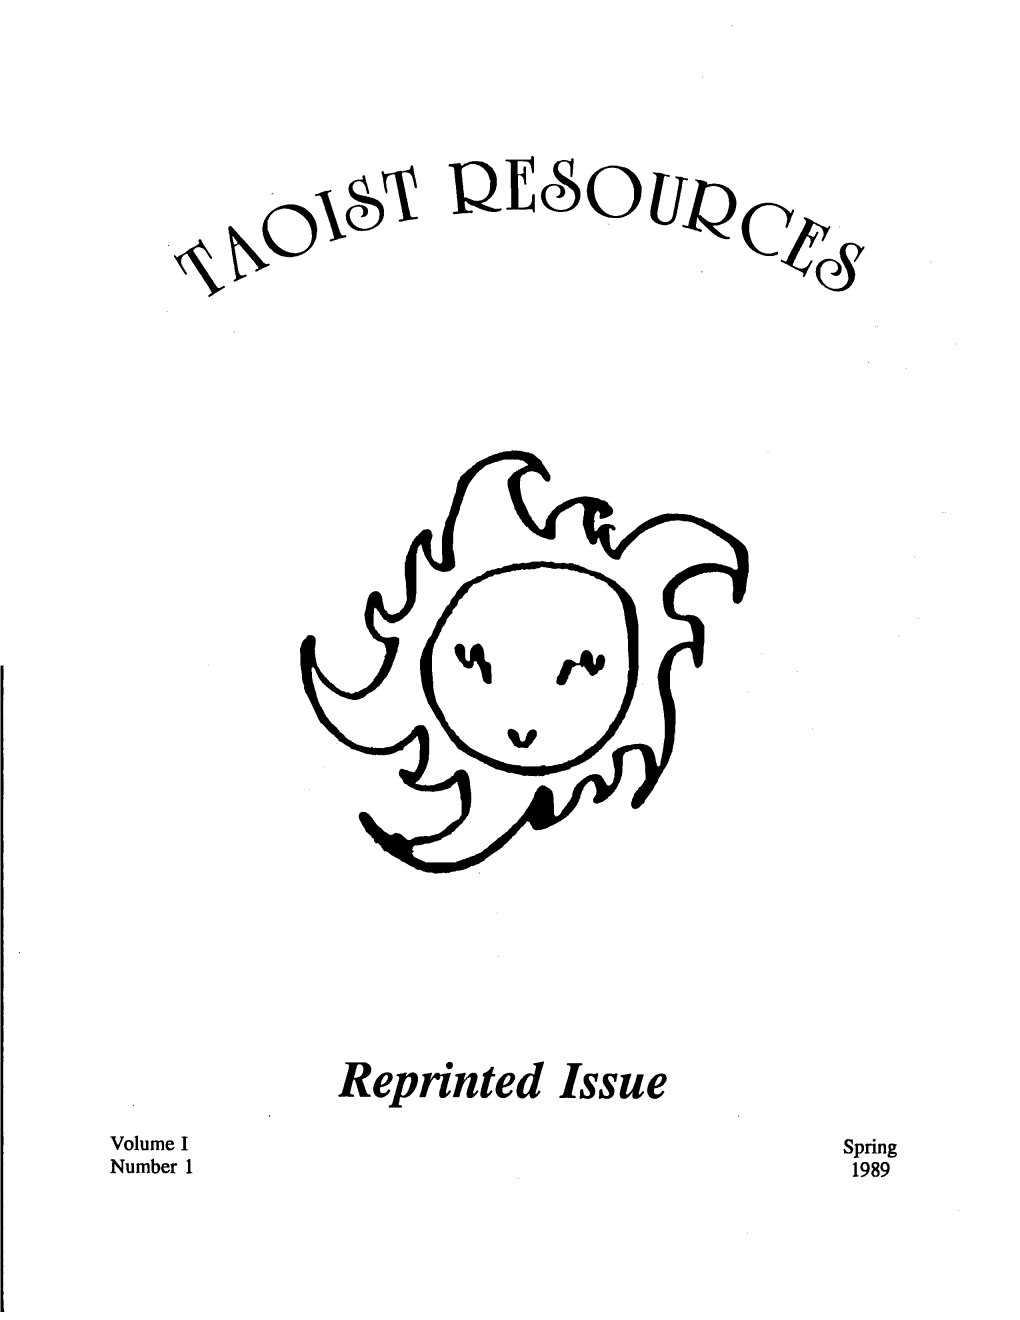 Reprinted Issue